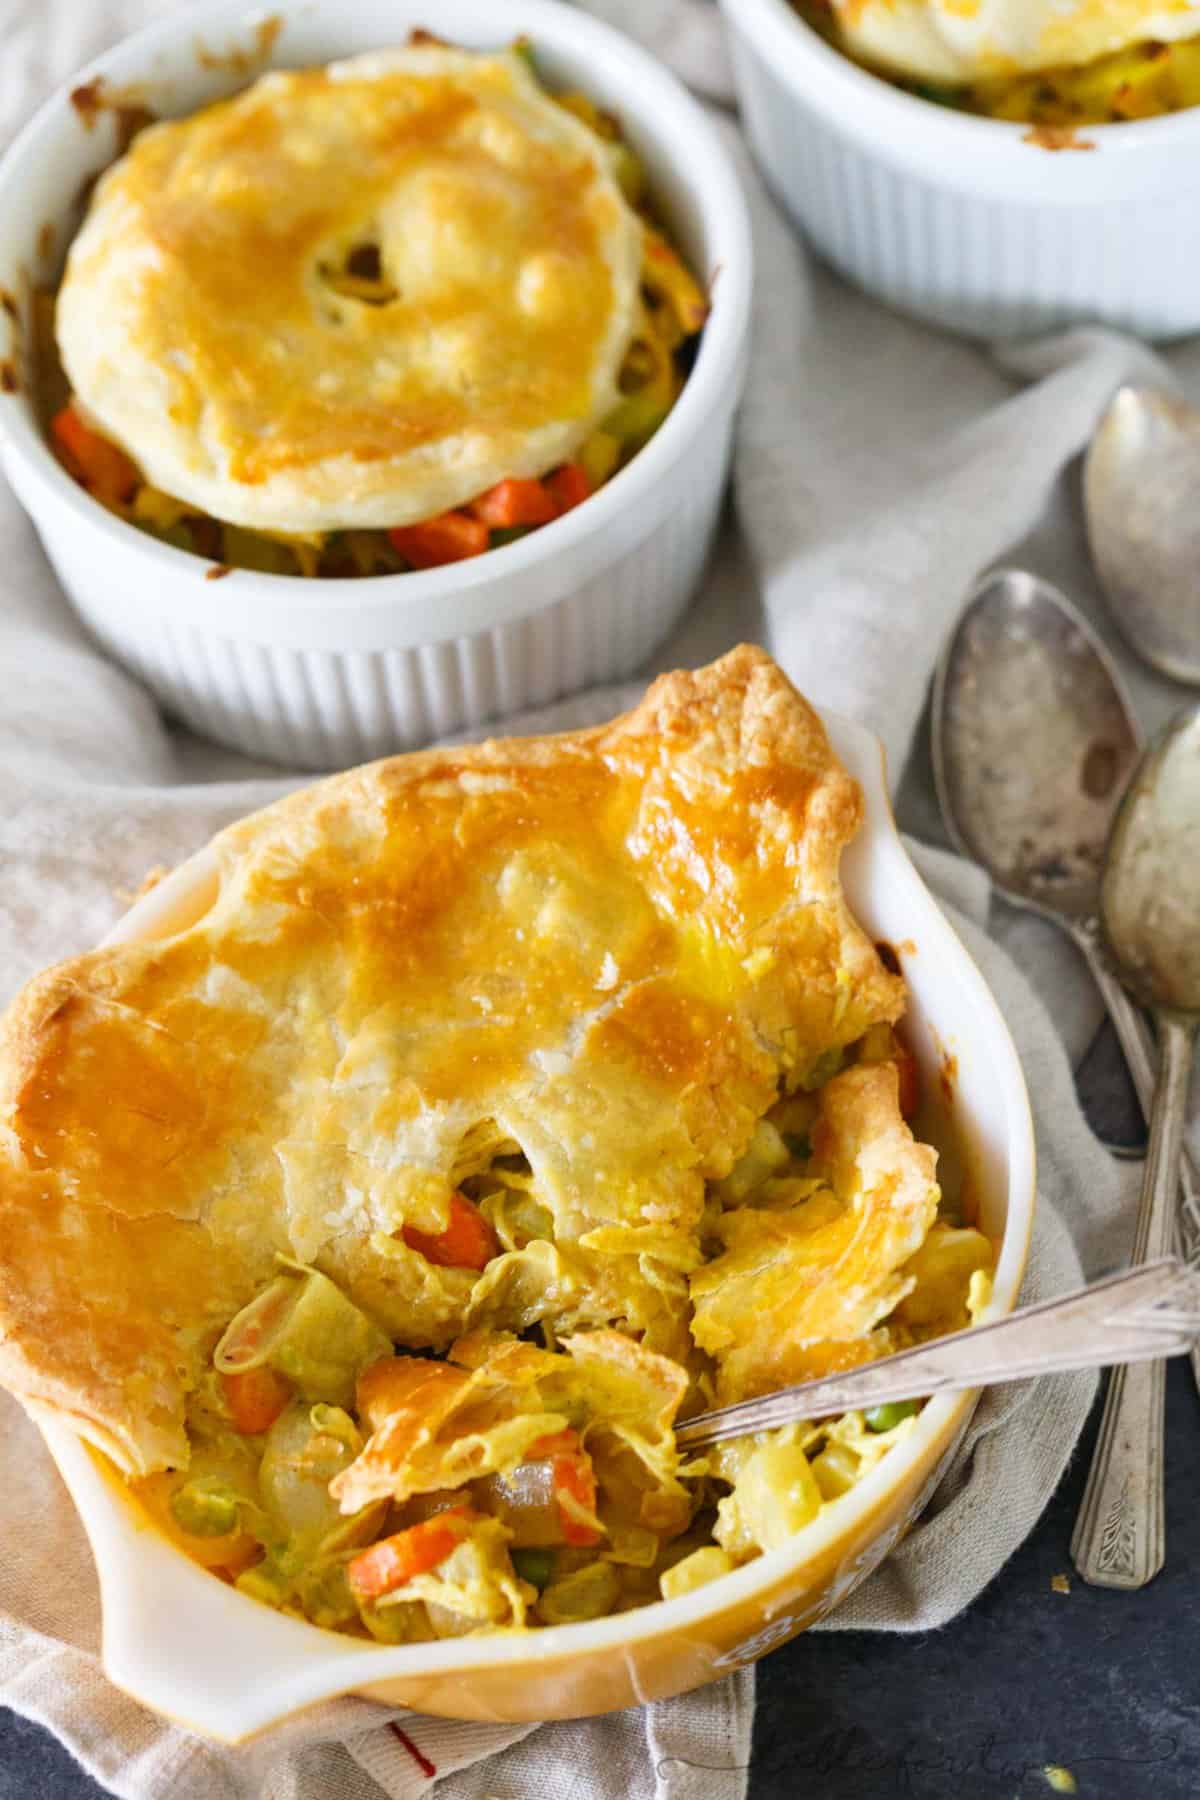 Curry turkey pot pie is a unique and flavorful approach to using up turkey from Thanksgiving leftovers! The spice and overall taste of this pot pie will have you loving all the leftovers!